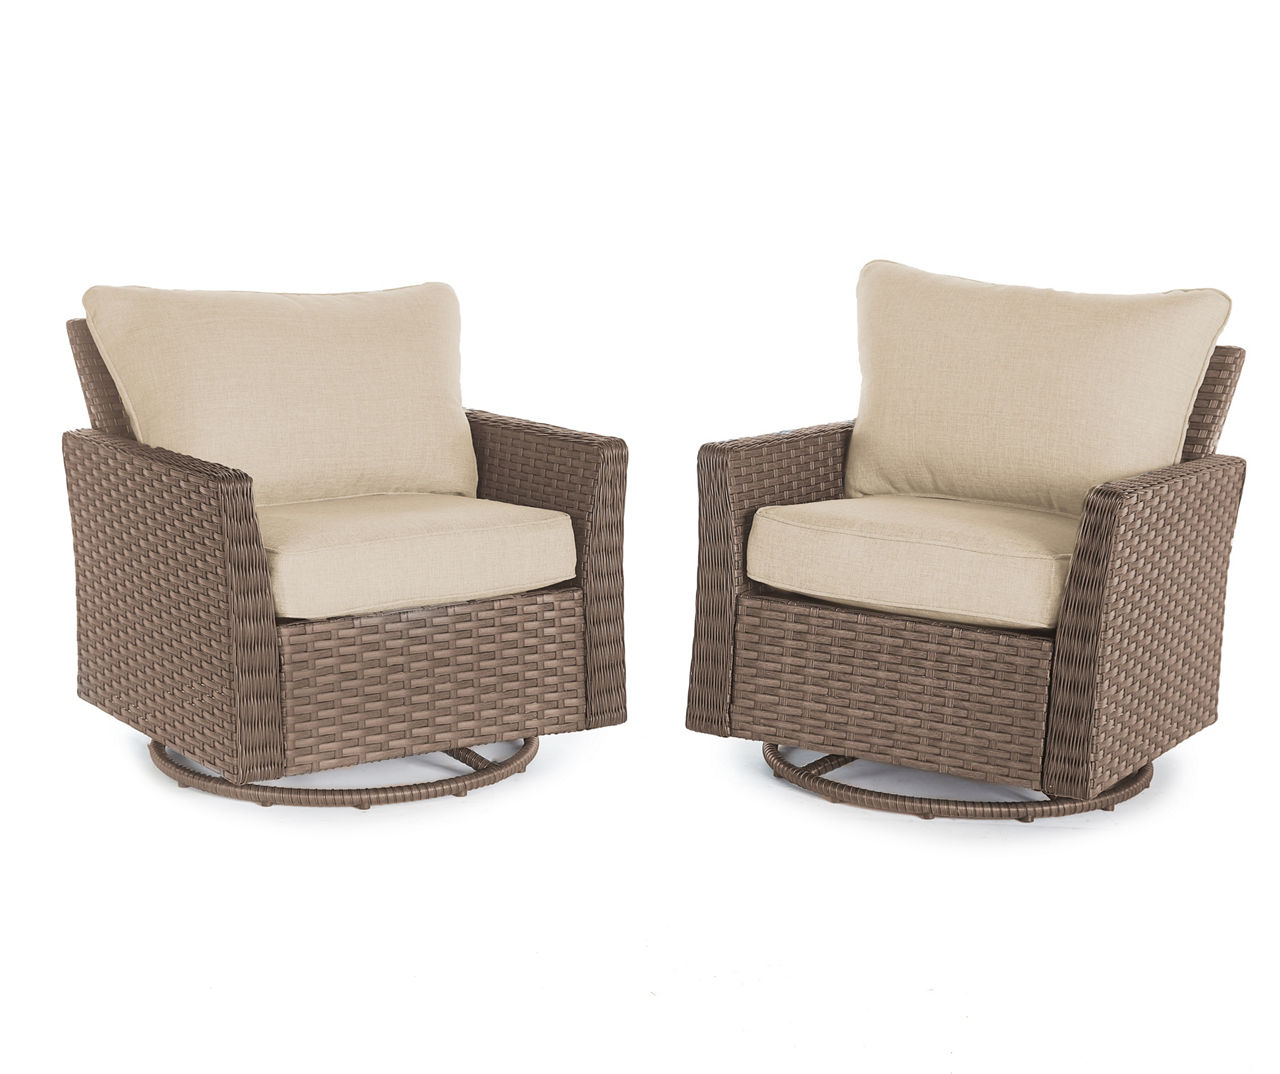 Autumn Cove Tan All-Weather Wicker Cushioned Patio Swivel Gliders, 2-Pack